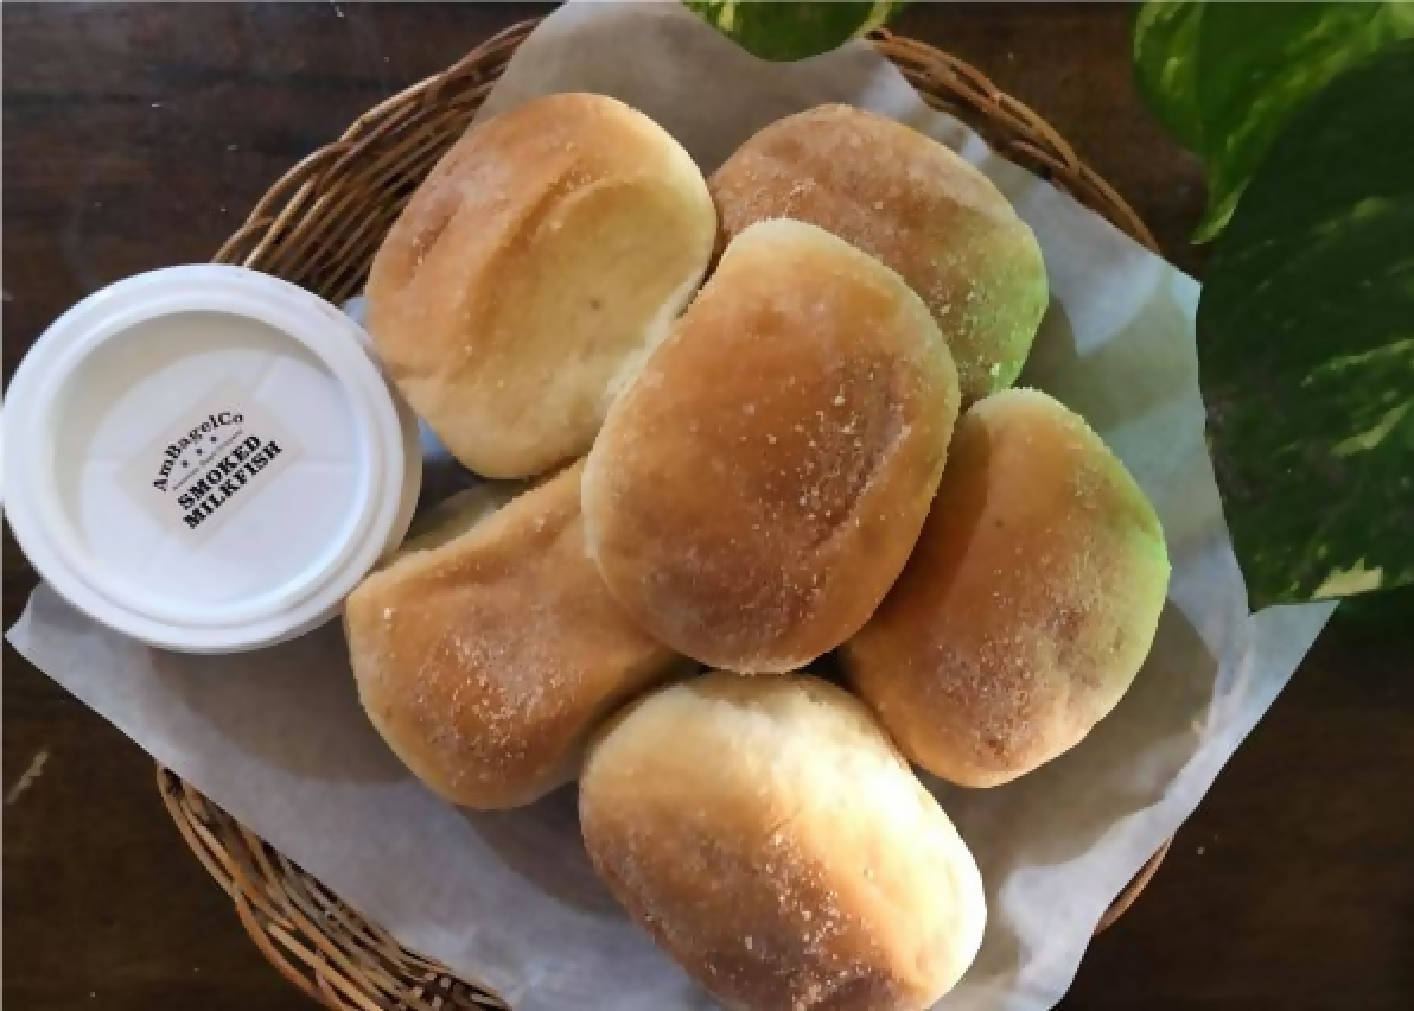 Sour dough pandesal with smoked cheese